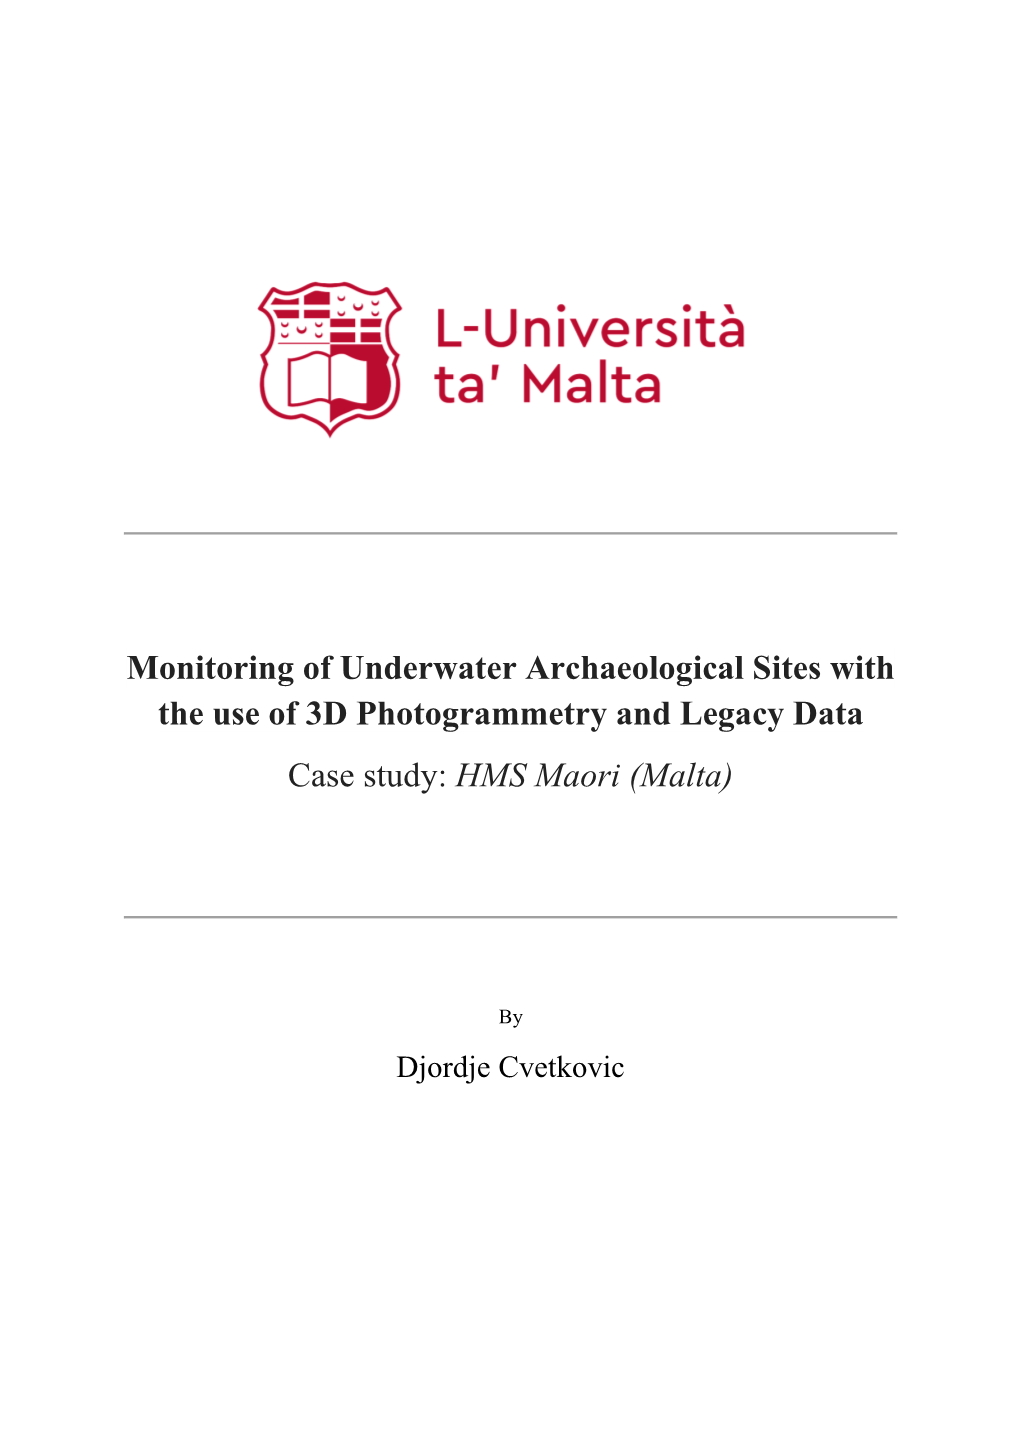 Monitoring of Underwater Archaeological Sites with the Use of 3D Photogrammetry and Legacy Data Case Study: HMS Maori (Malta)